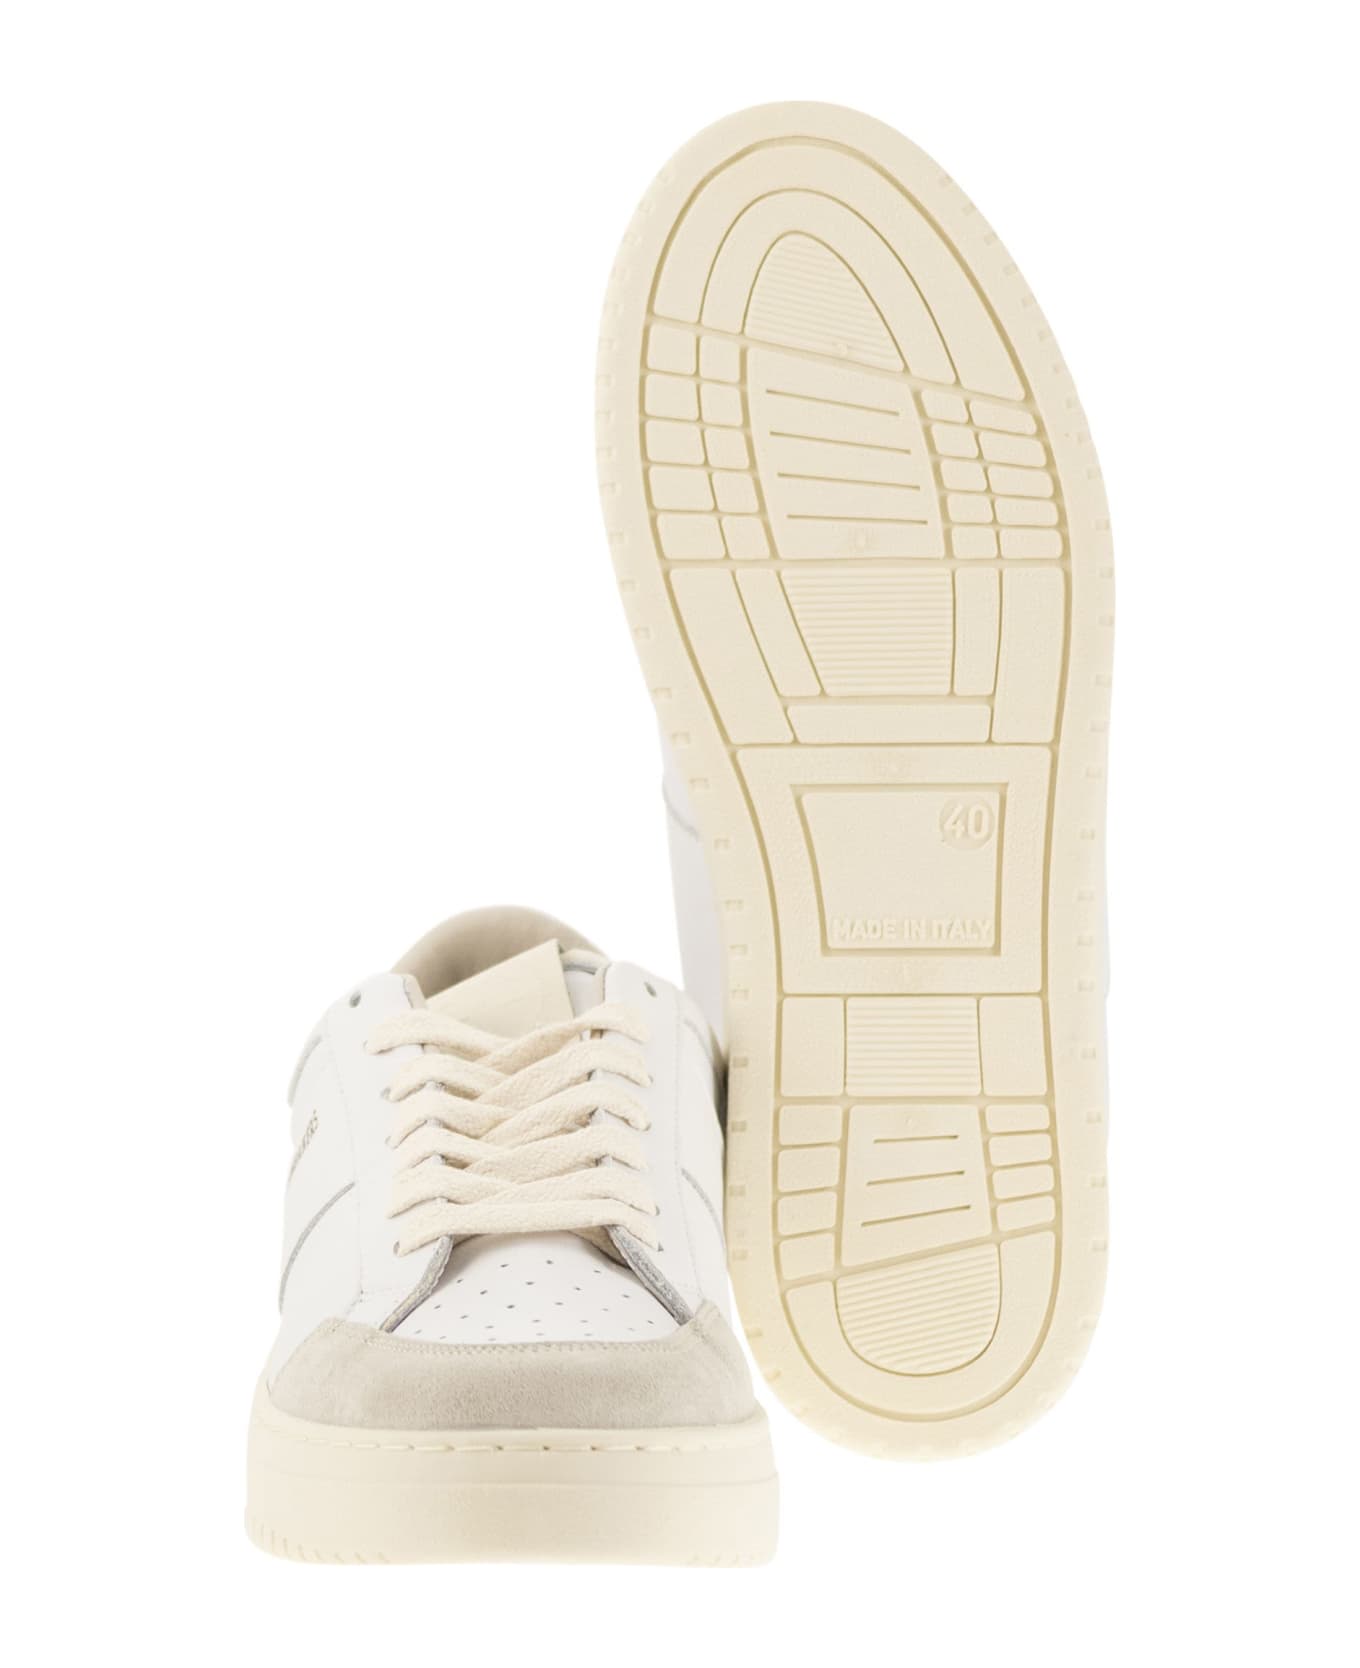 Saint Sneakers Sail - Leather And Suede Trainers - White スニーカー